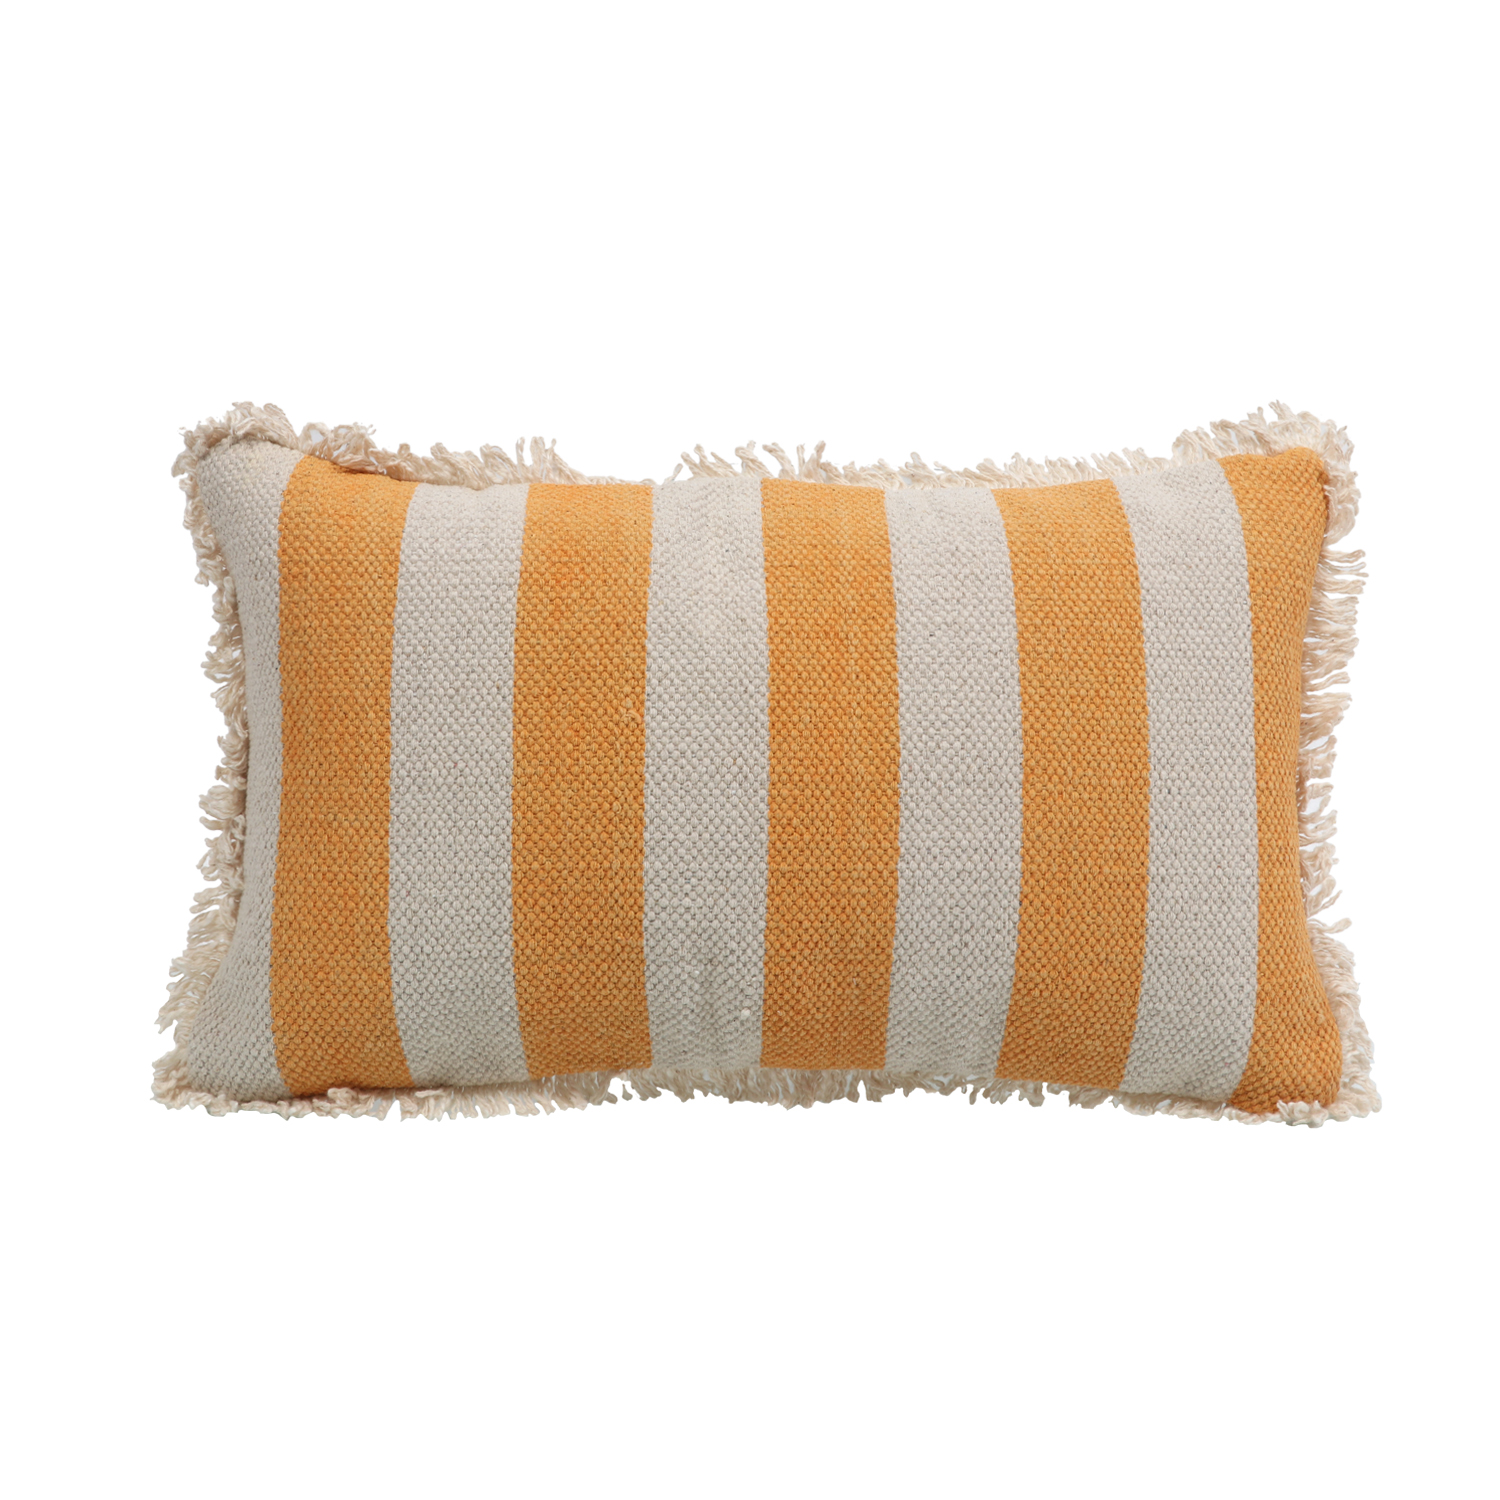 Printed Stripe Yellow Cushions Covers with fringes 12X20 Inch